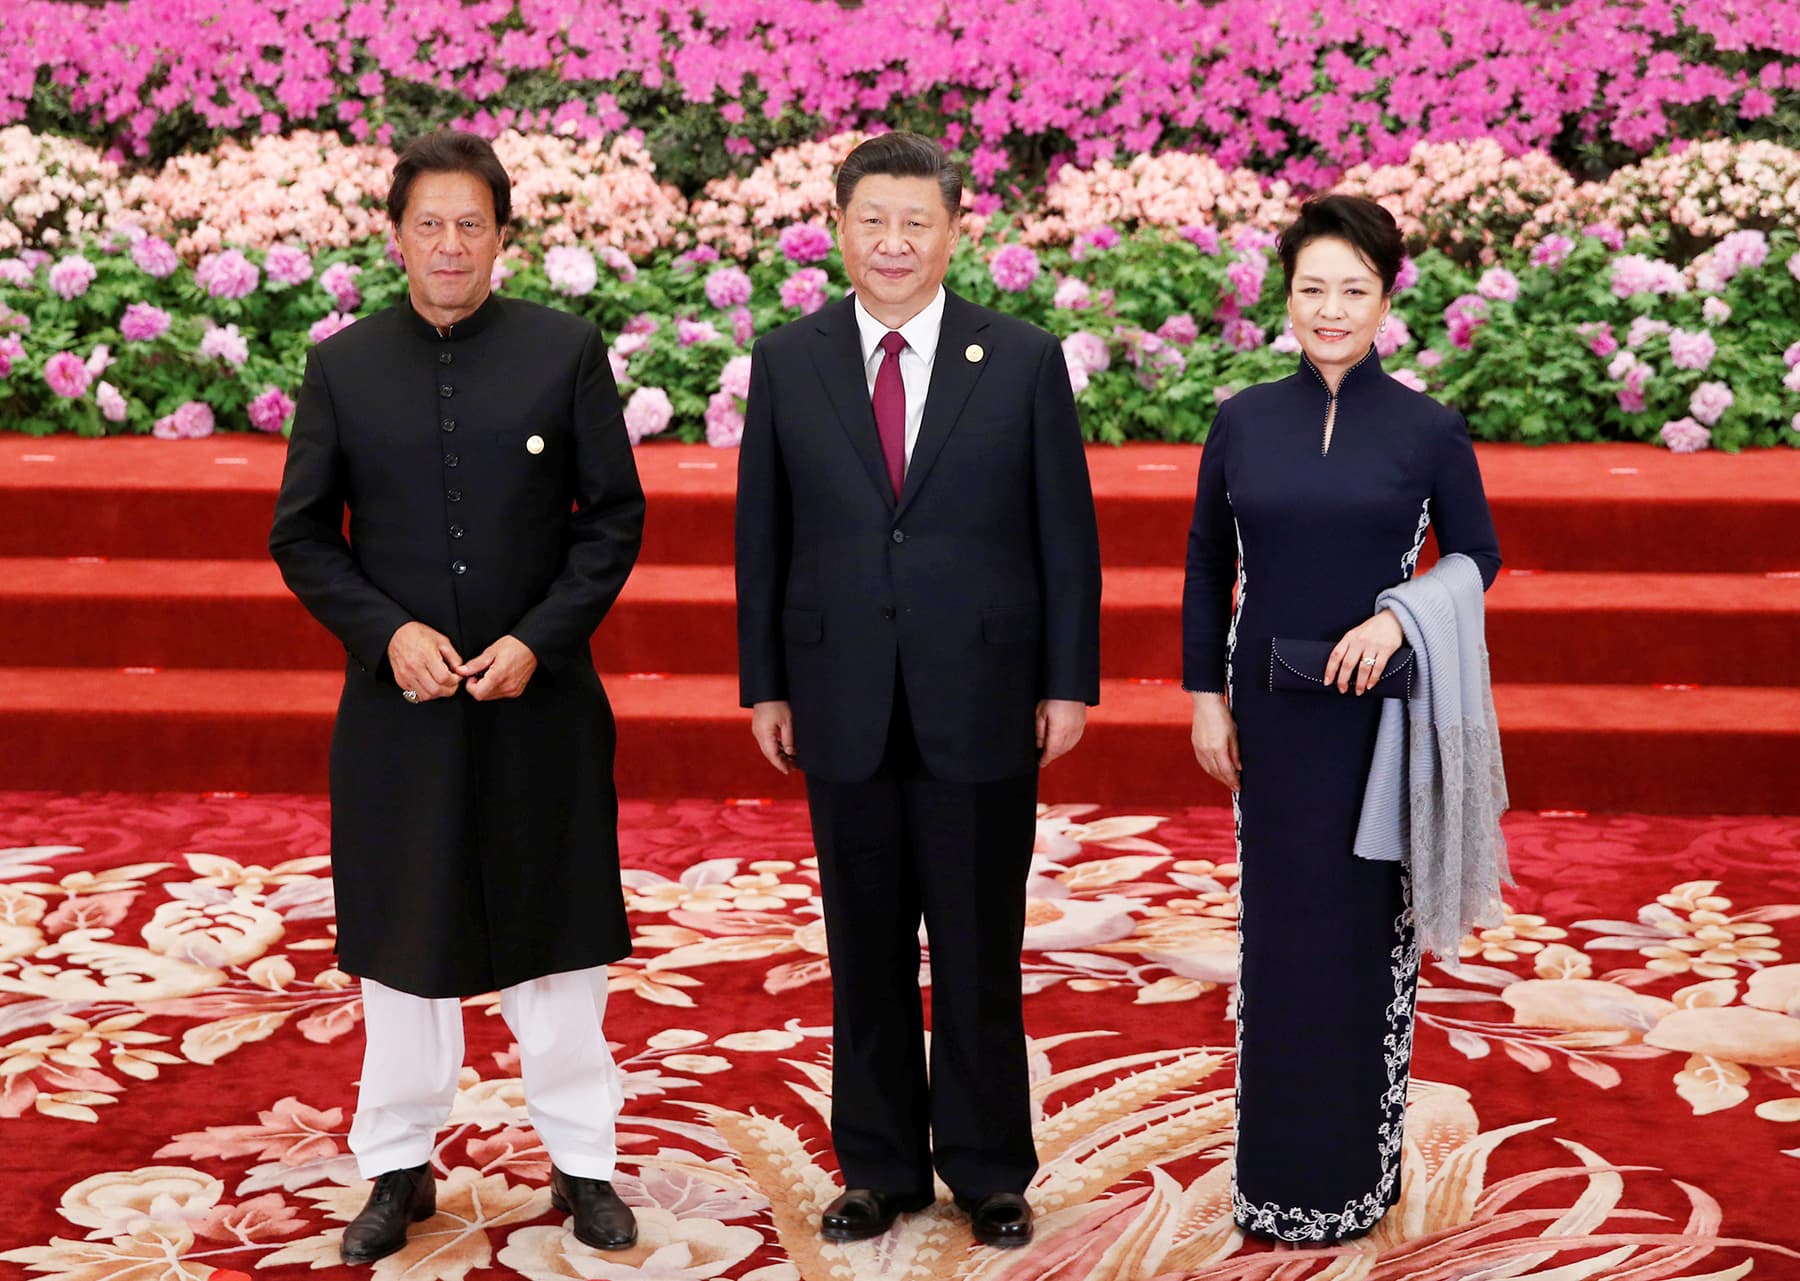 Pakistani Prime Minister Imran Khan arrives to attend a welcoming banquet for the Belt and Road Forum hosted by Chinese President Xi Jinping and his wife Peng Liyuan at the Great Hall of the People in Beijing, China, April 26, 2019. REUTERS/Jason Lee/Pool